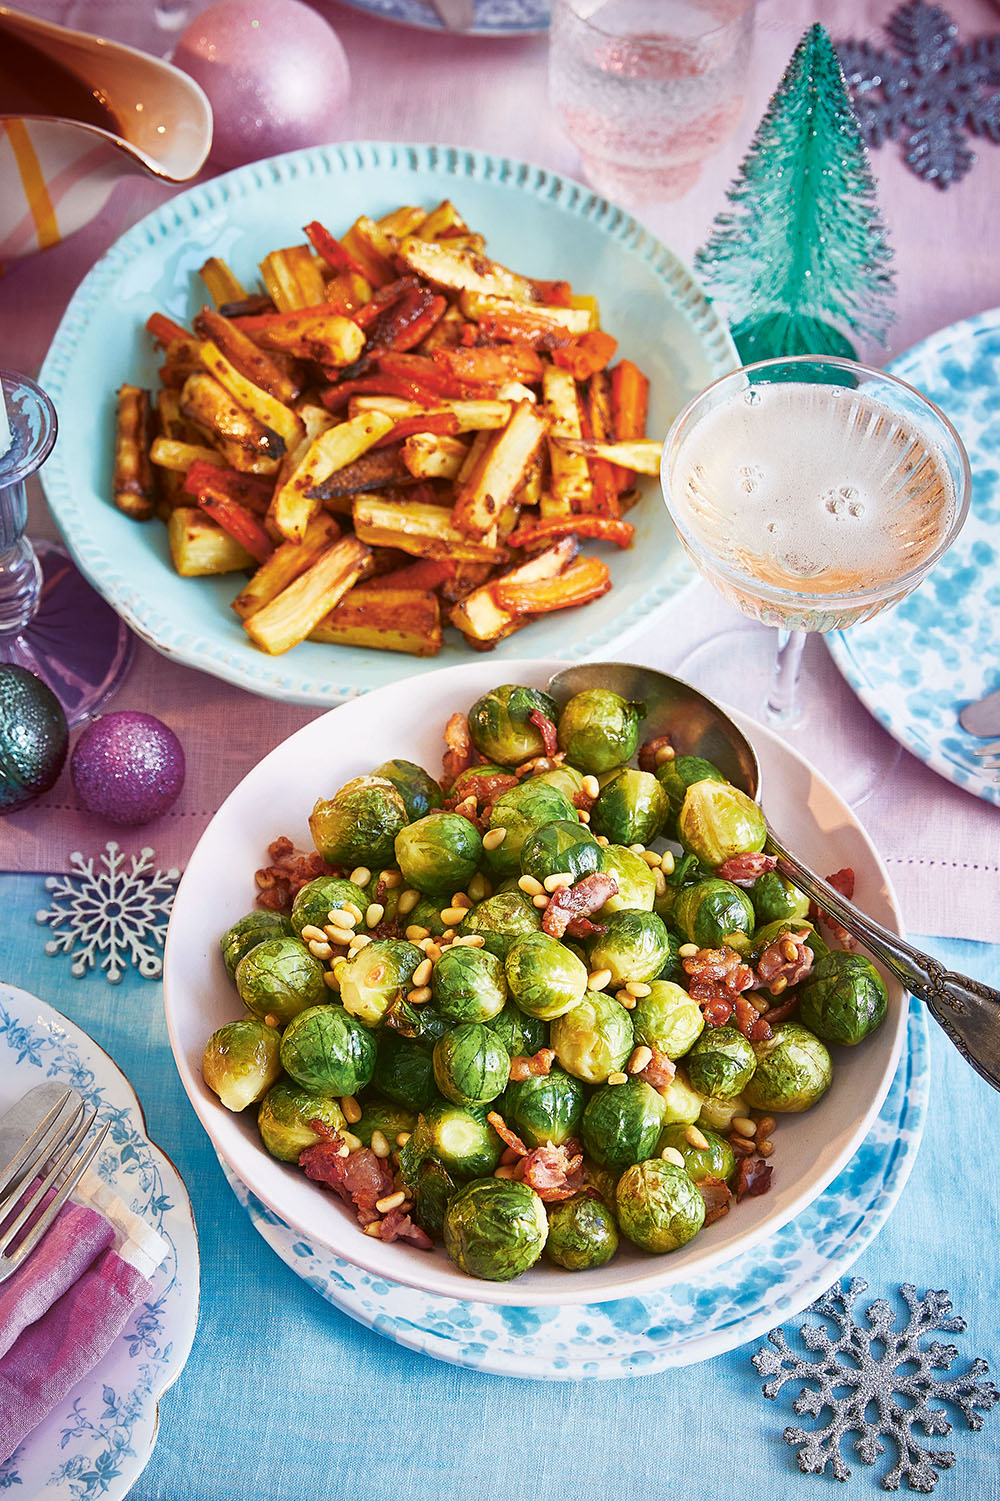 Sticky Maple Orange Parsnips/Carrots + 3-Ingredient Bacon Brussels Sprouts